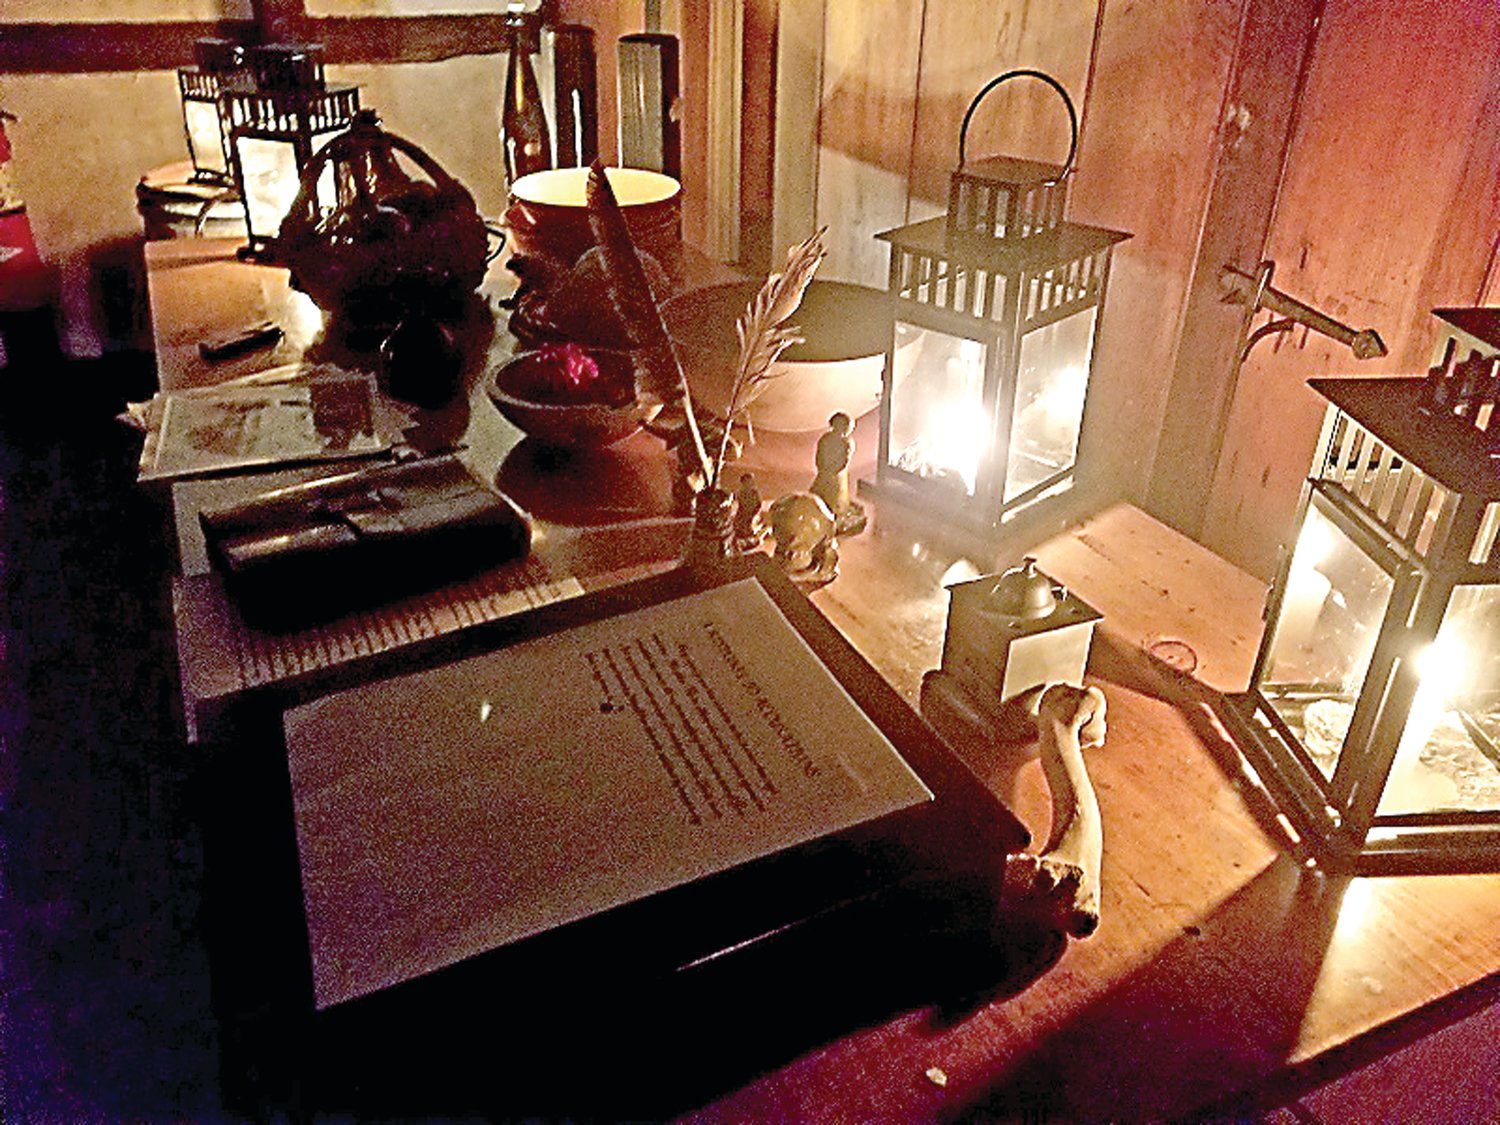 Pennsbury Manor offers escape room adventures that take place by candlelight.